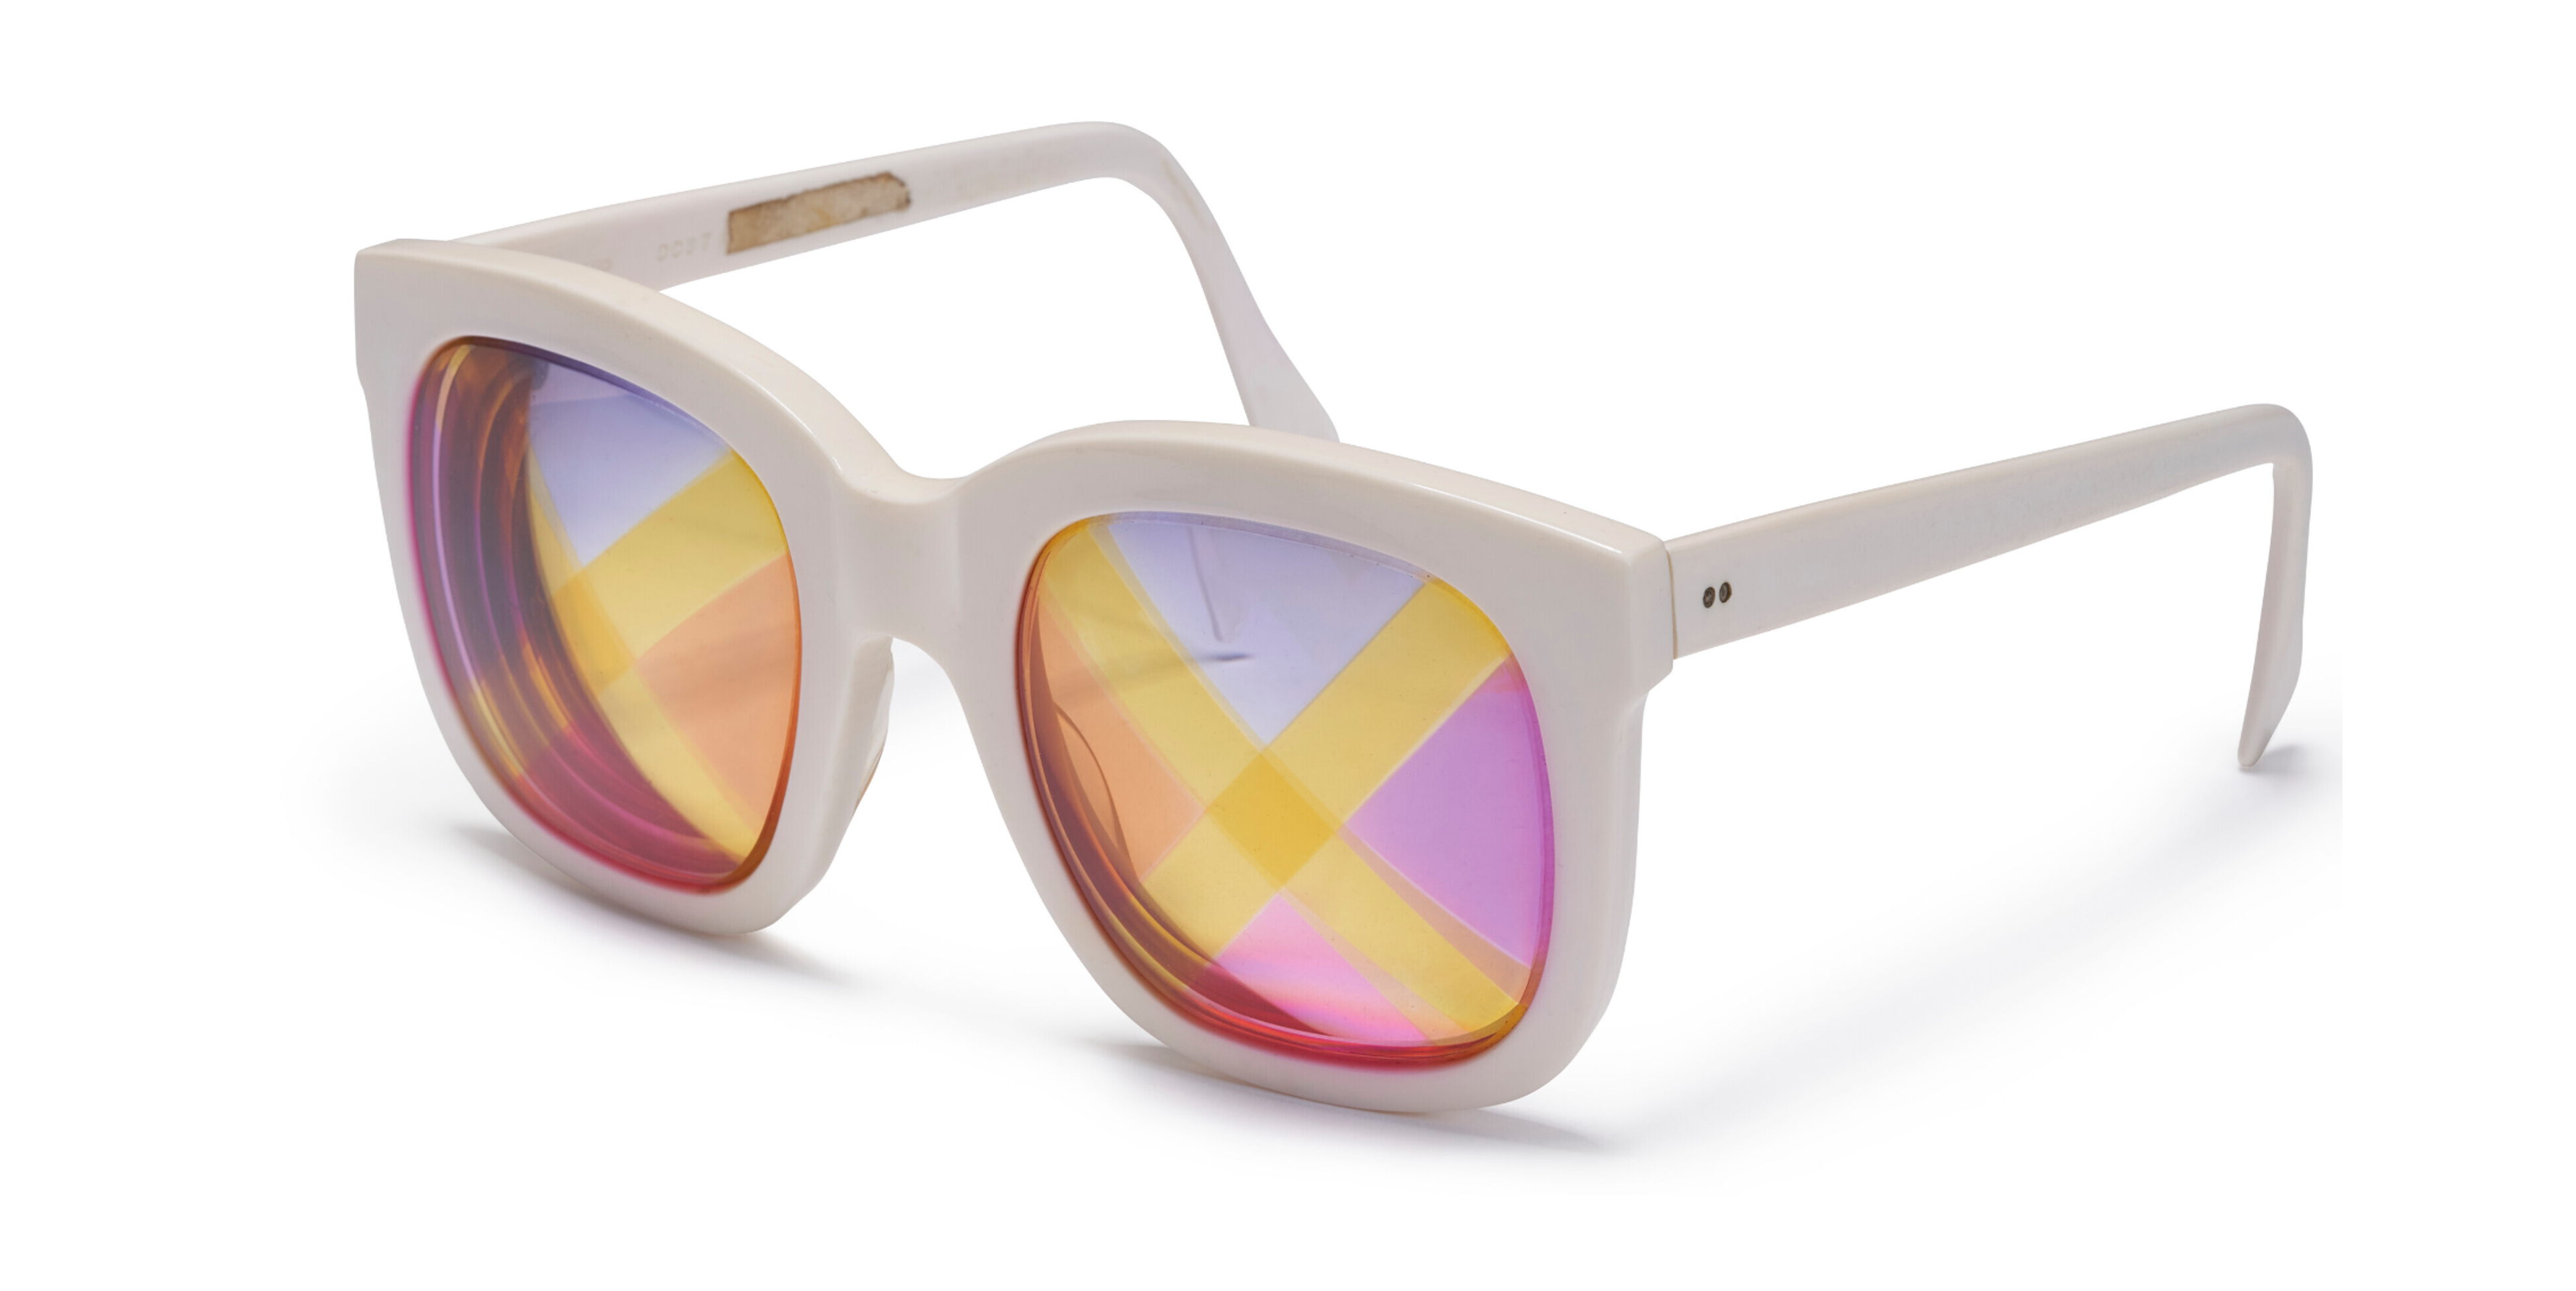 An image of a pair of sunglasses with white plastic frames, the lenses with yellow X's against purple, pink, and orange background